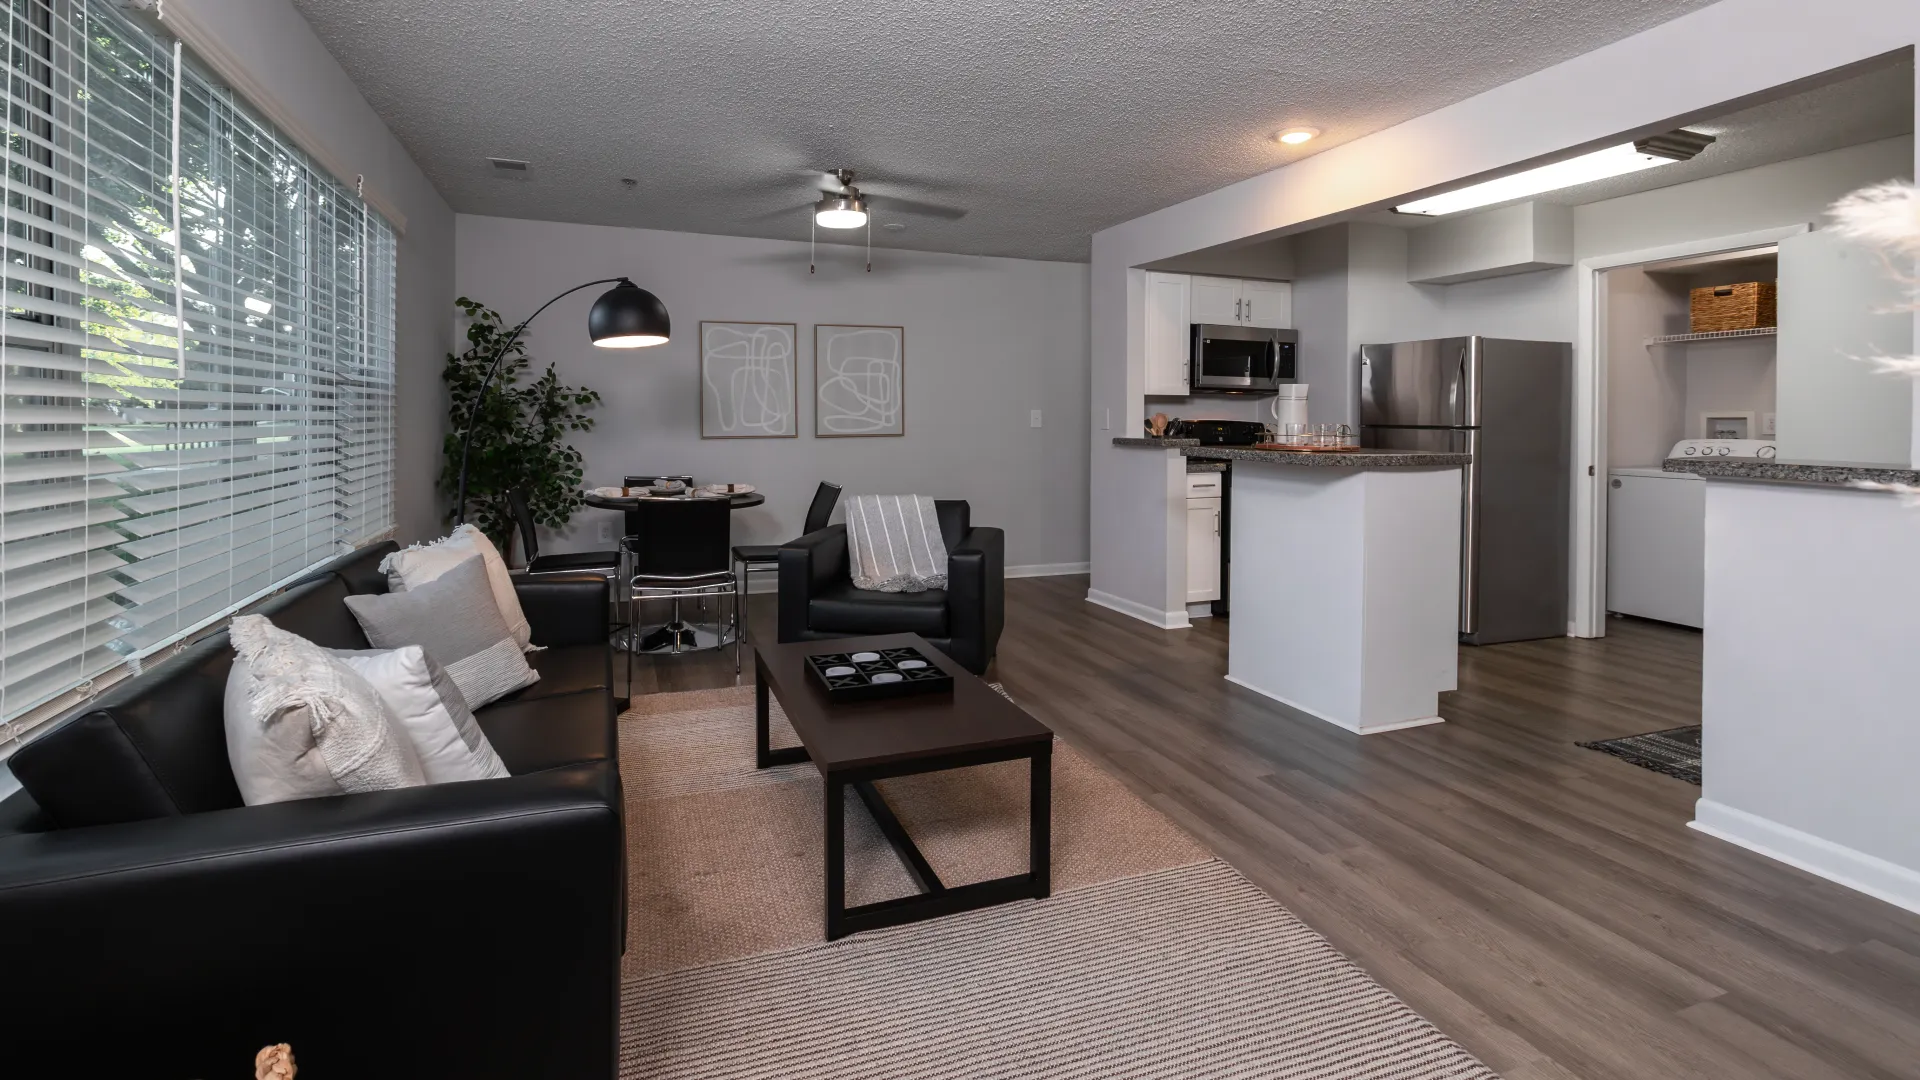 Modern open-concept living area at Onyx Apartments with sleek finishes, contemporary furnishings, and seamless flow from the living room to the kitchen.